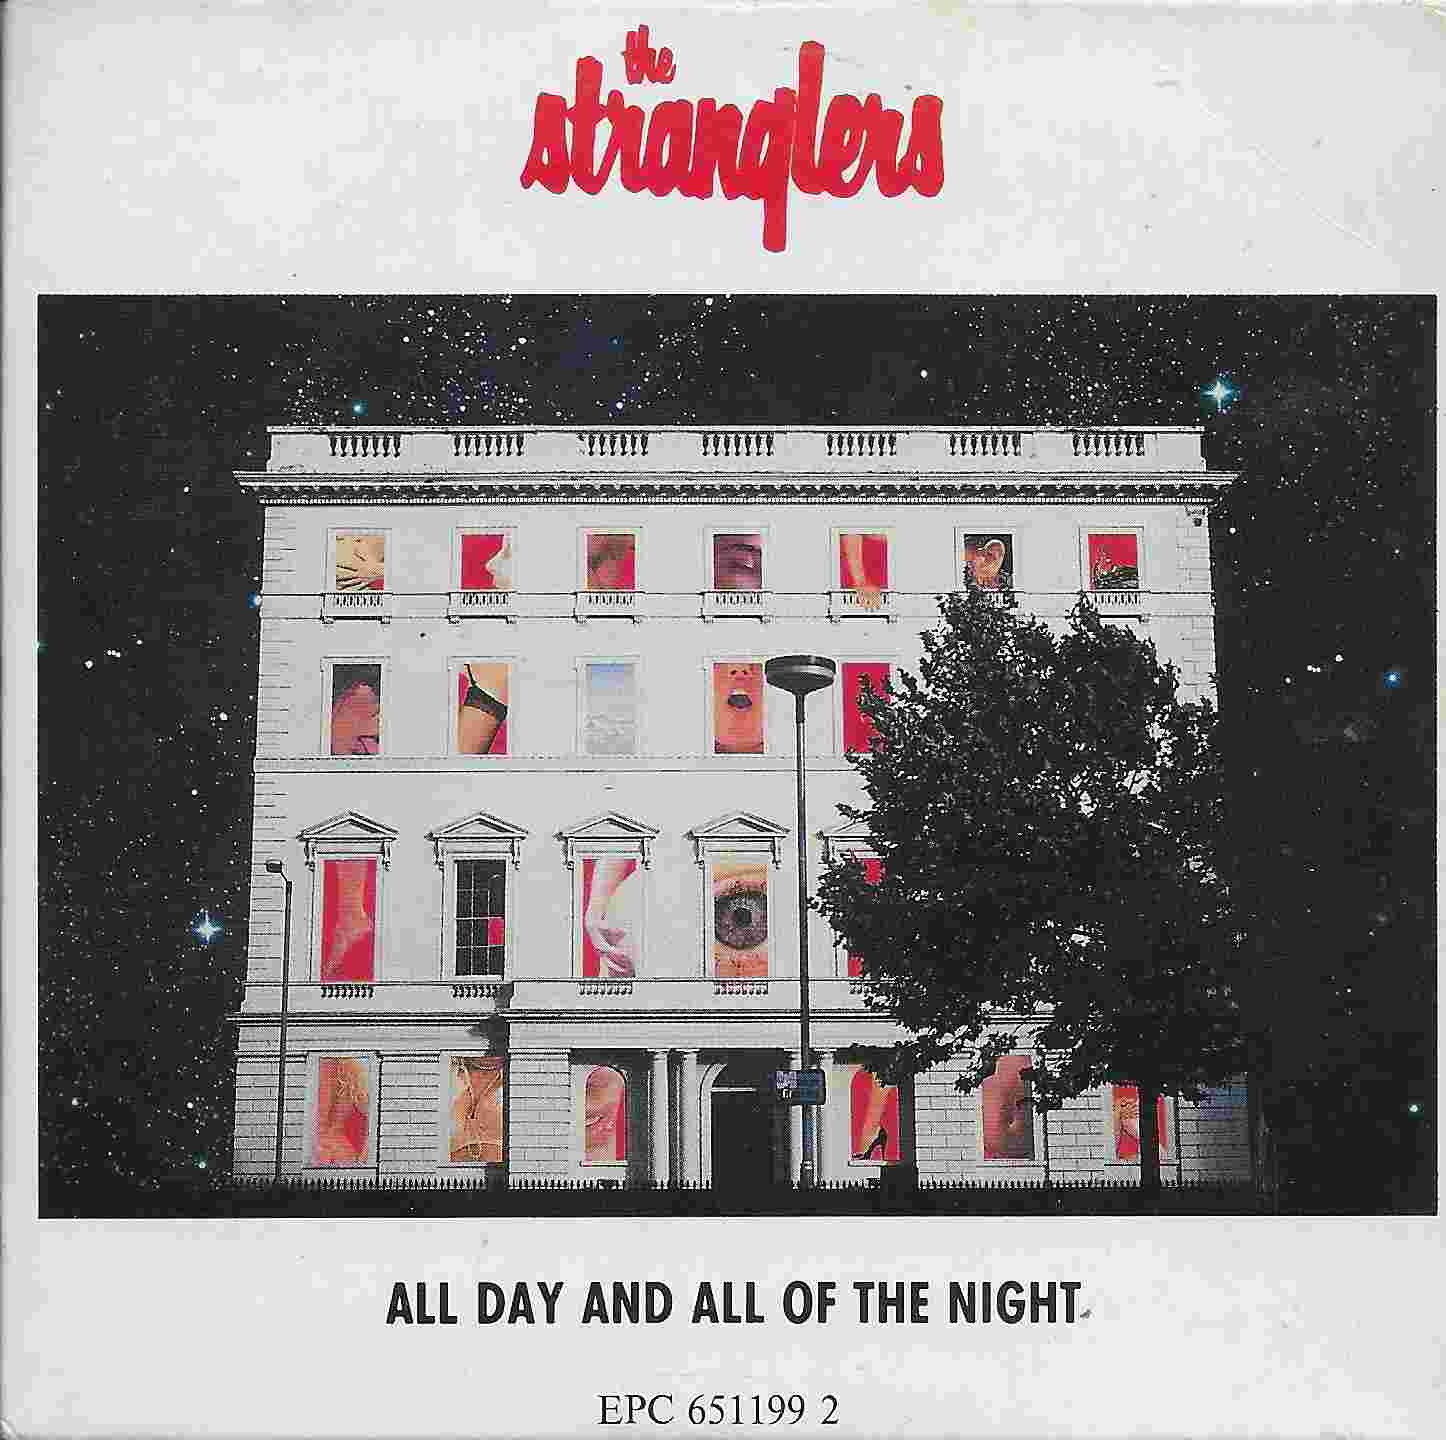 Picture of All day and all of the night by artist The Stranglers  from The Stranglers cdsingles